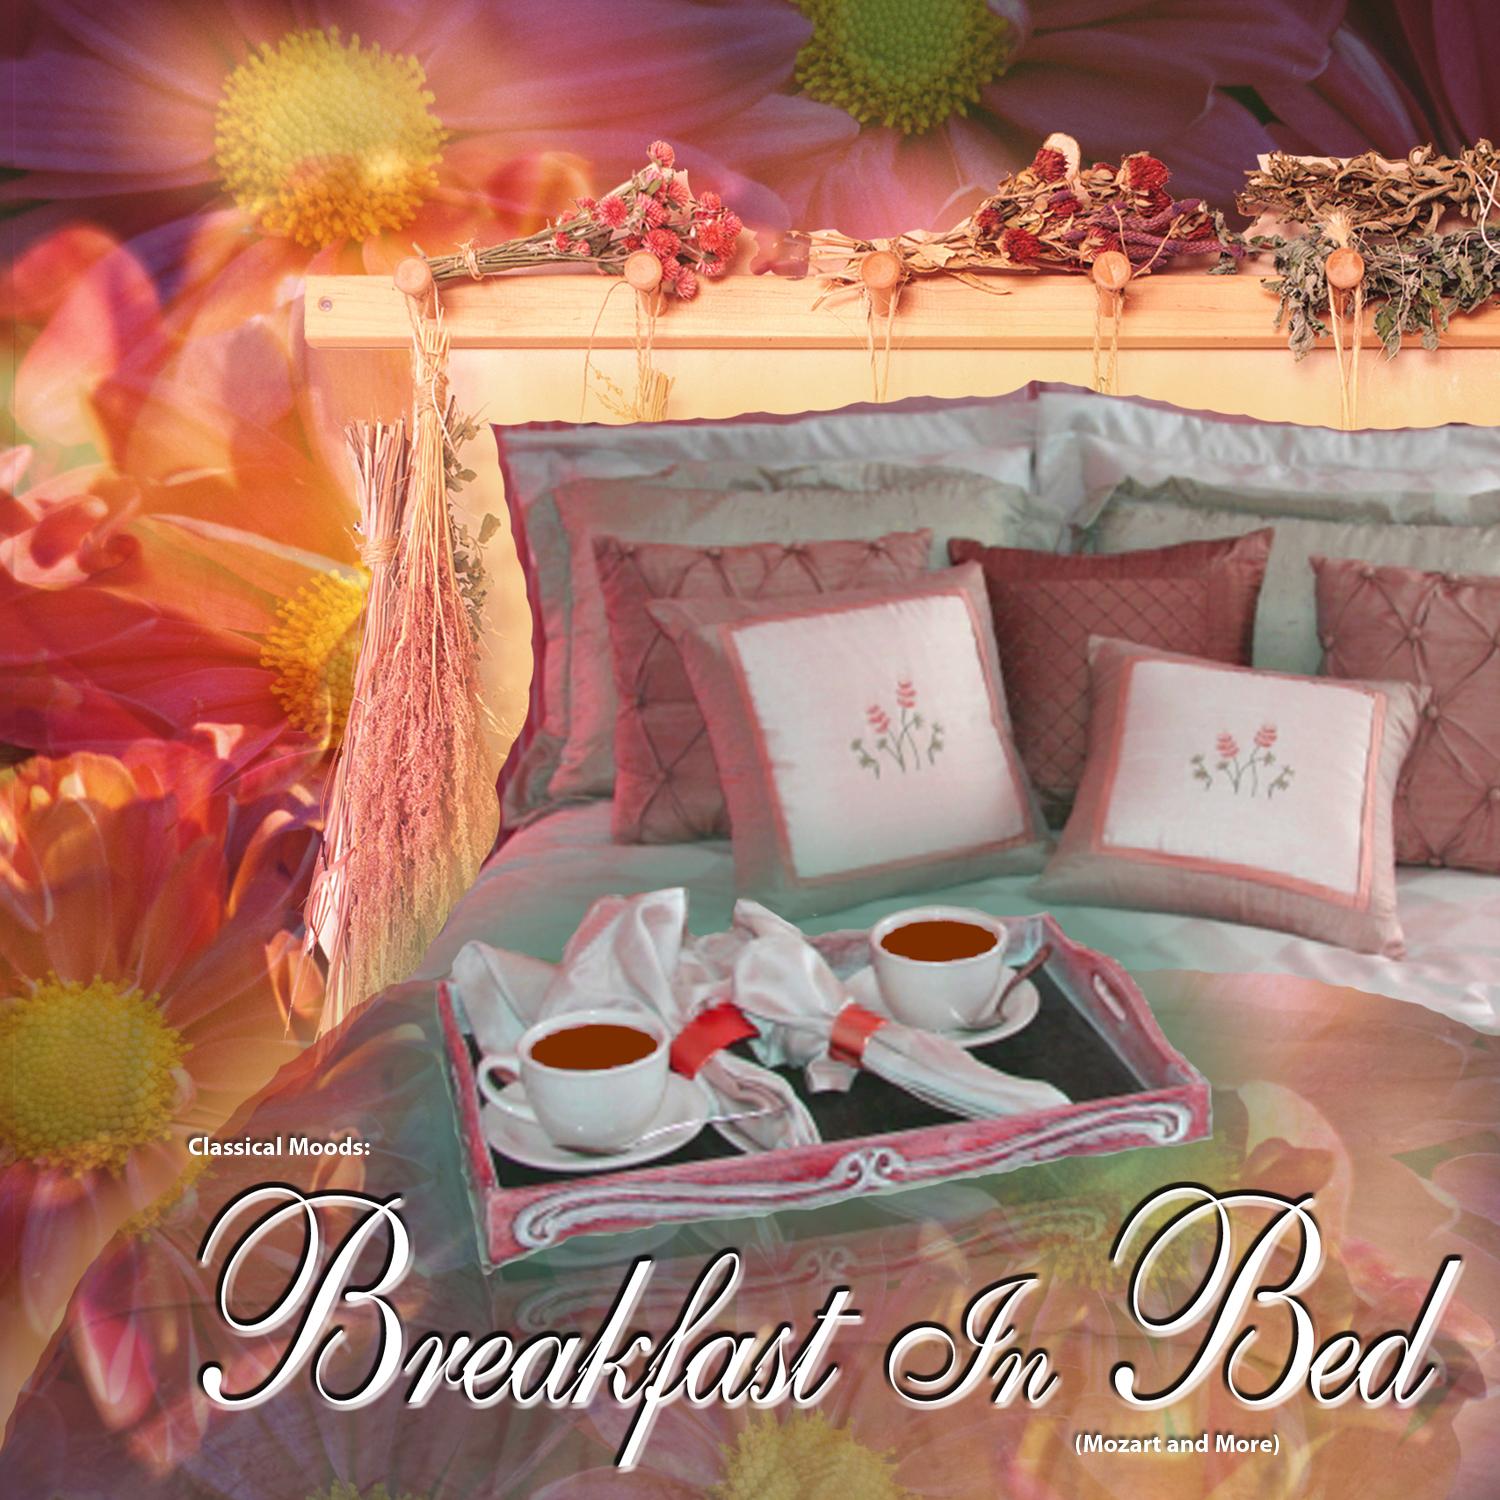 Classical Moods: Breakfast in Bed (Mozart and More)